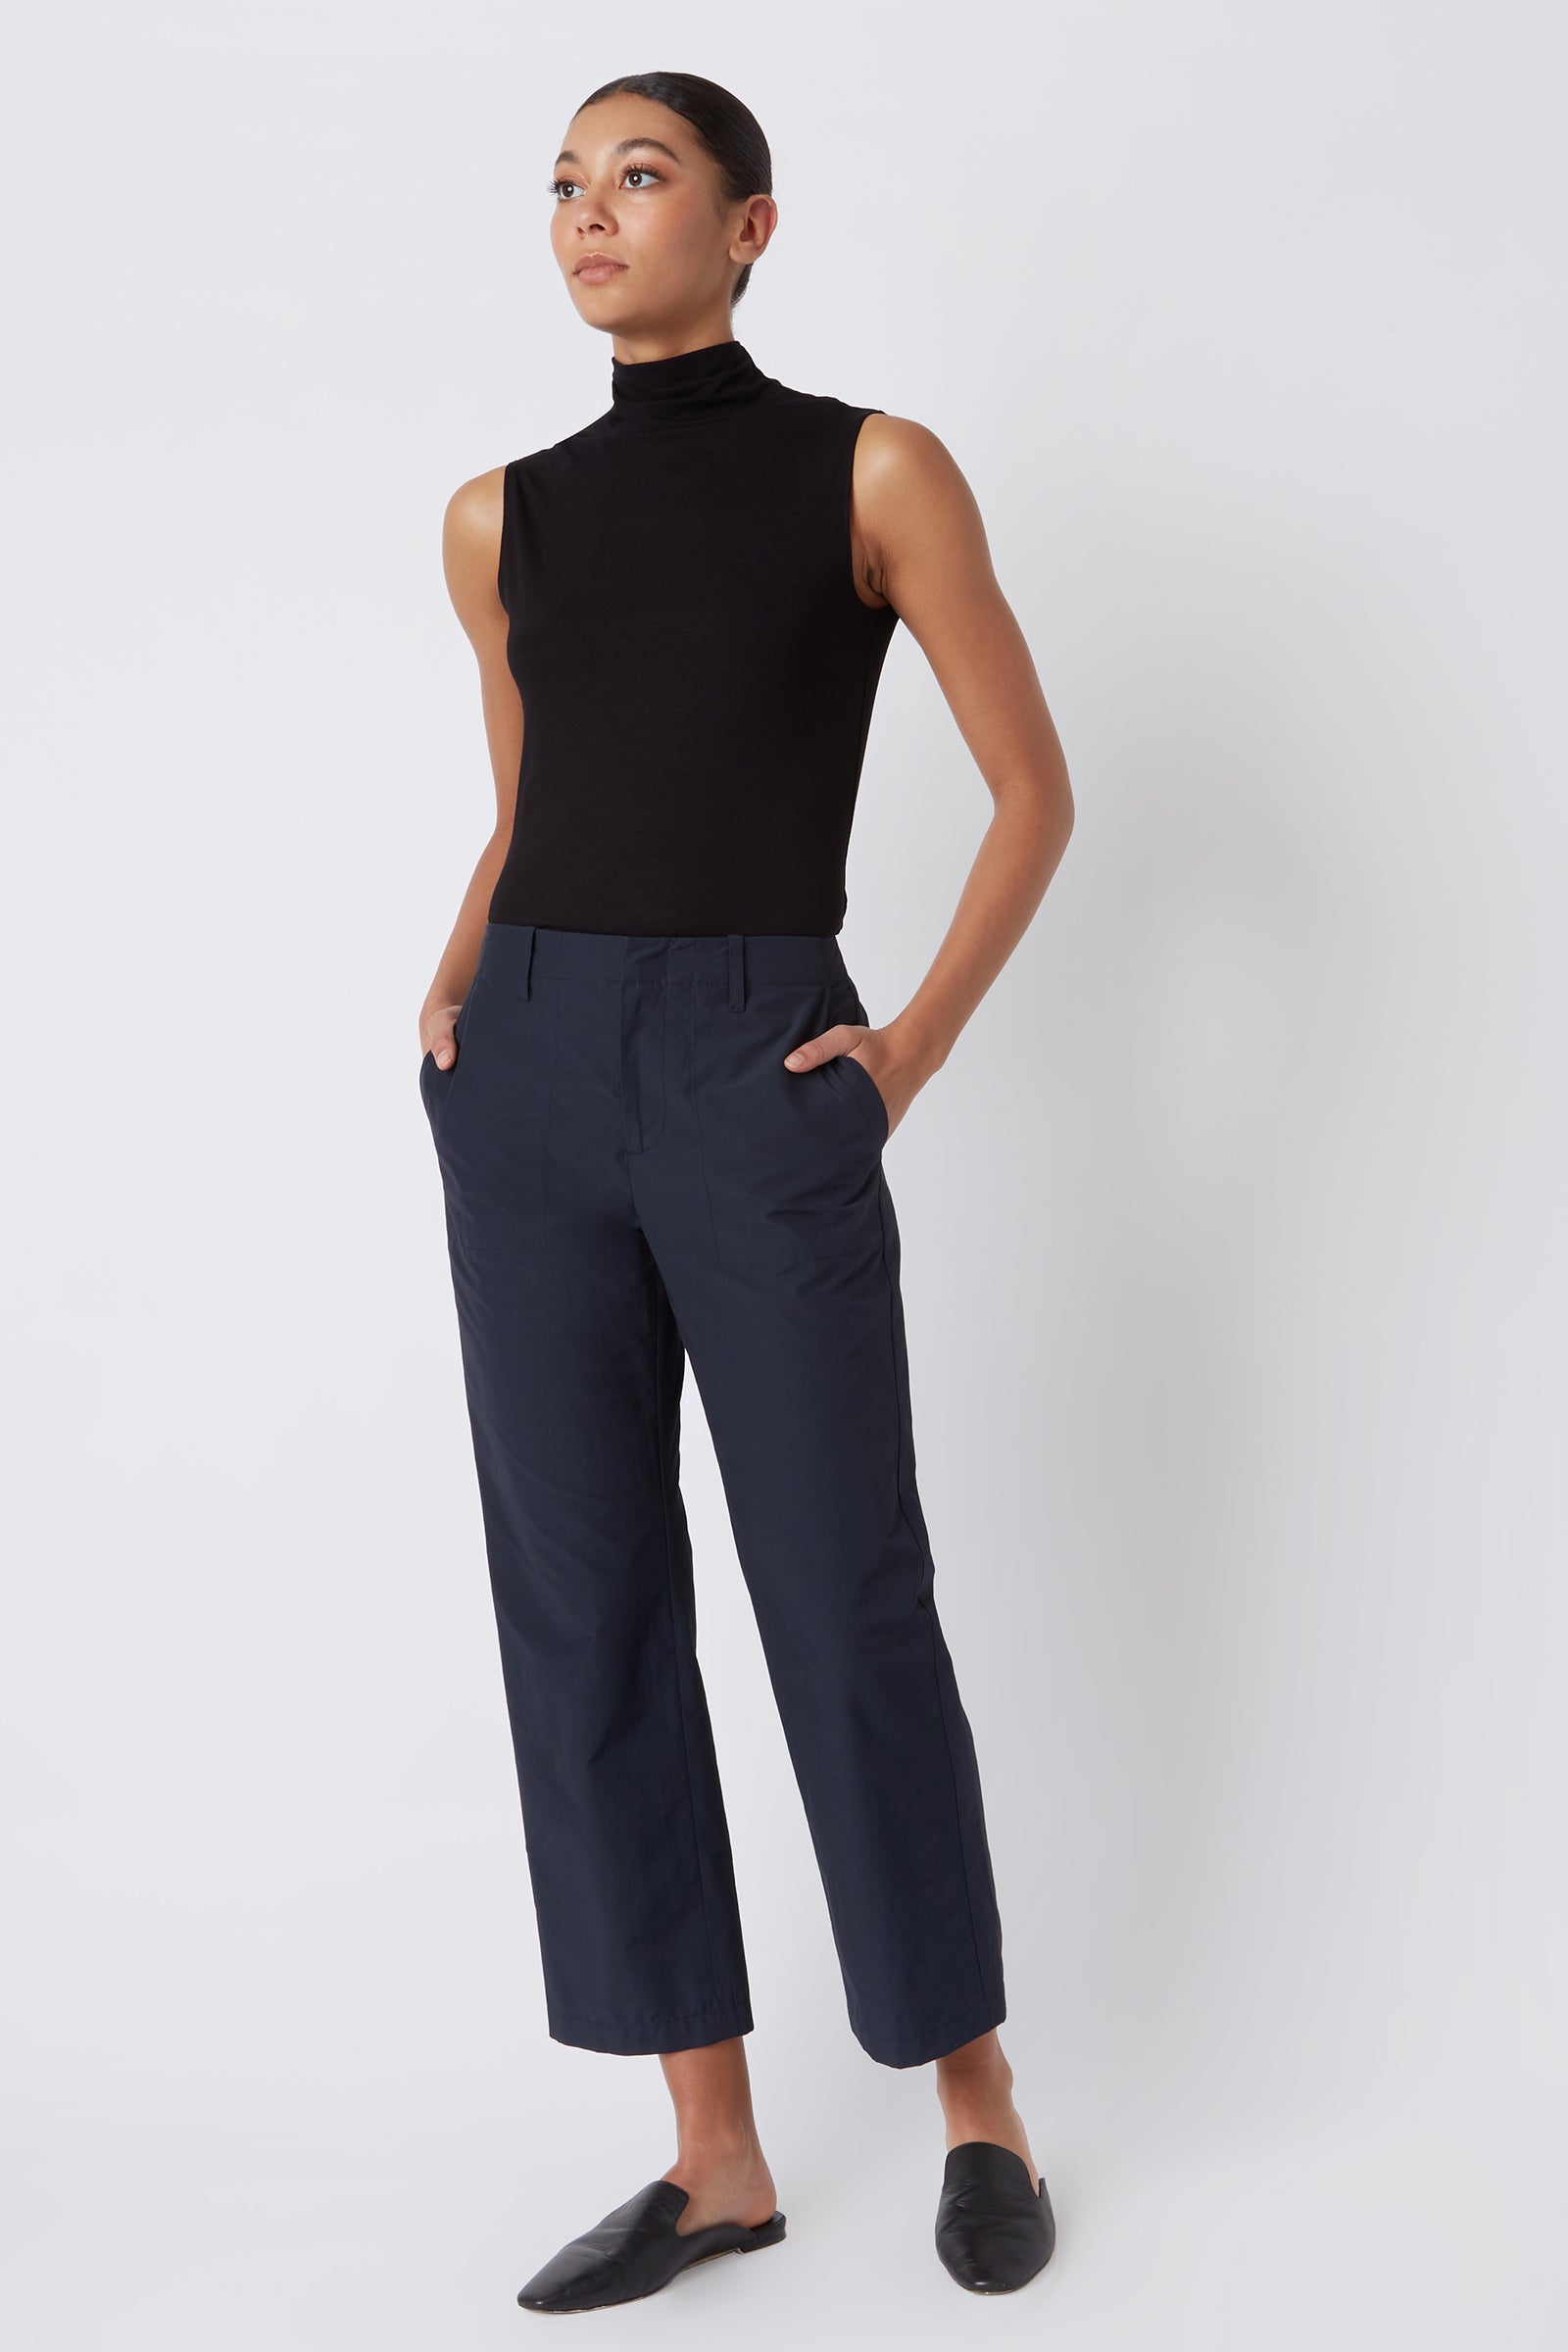 Kal Rieman Francoise Cigarette Pant in Navy Italian Broadcloth on Model with Hands in Pockets Full Front Side View